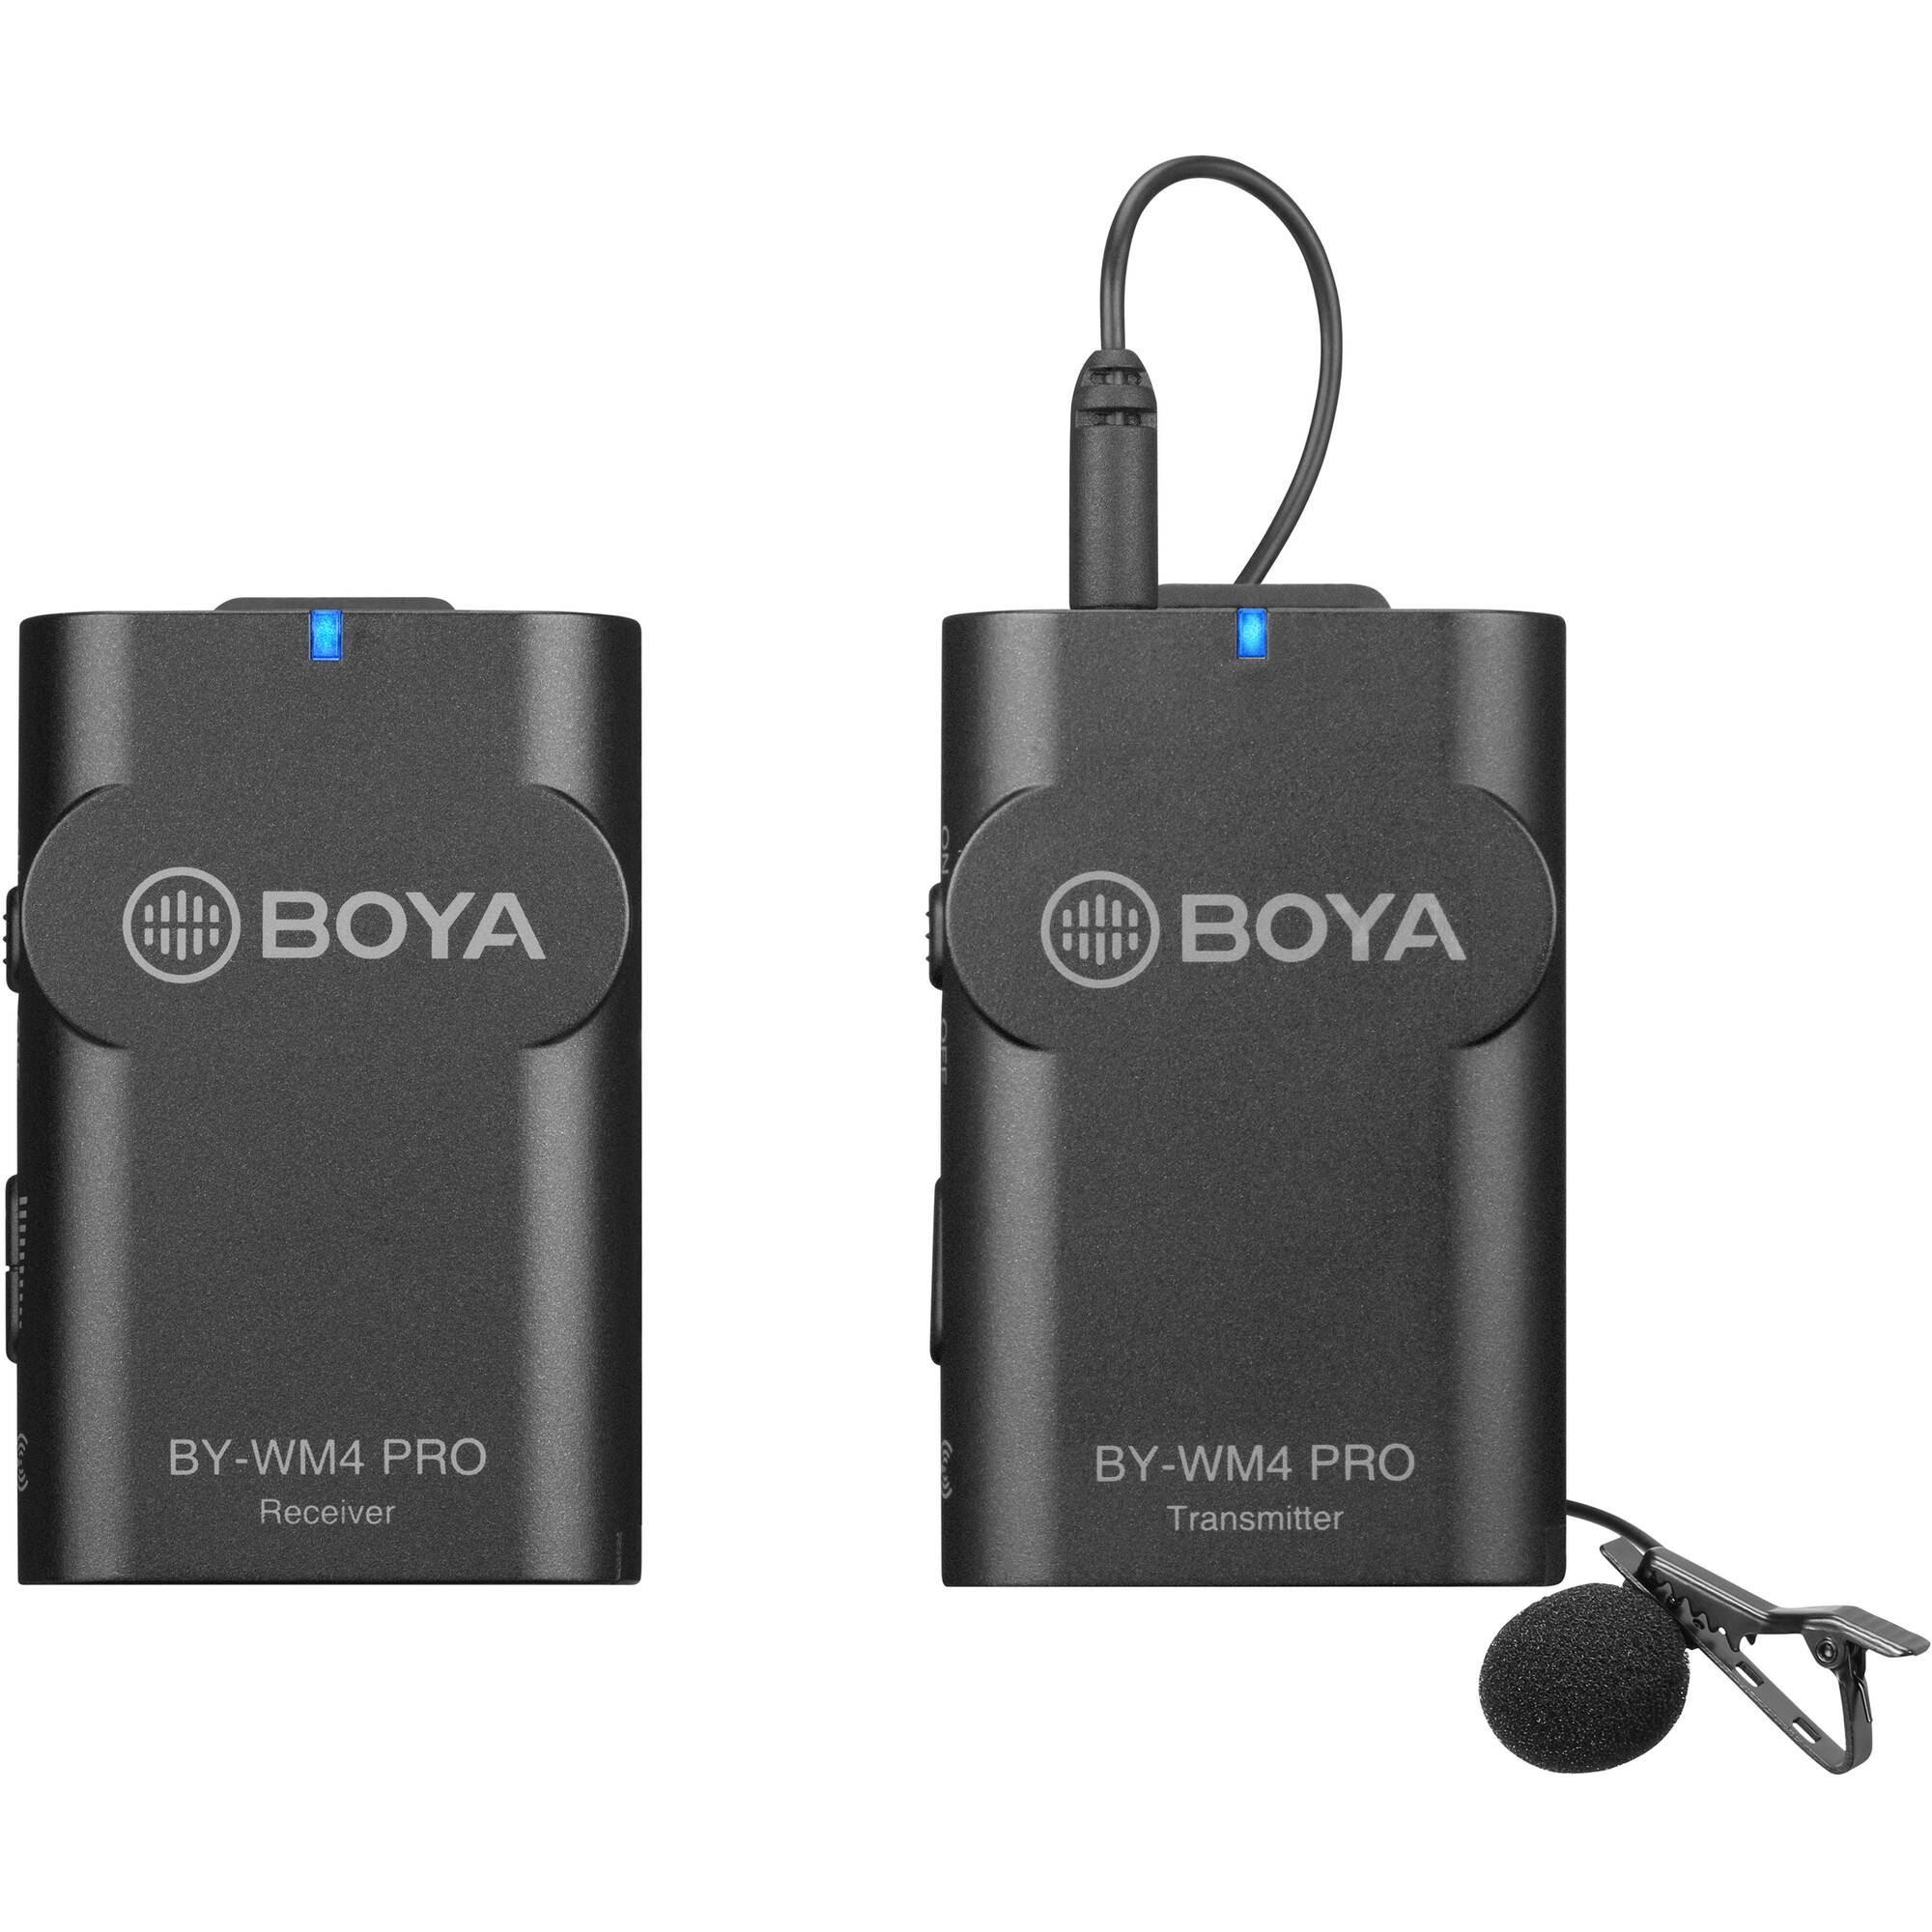 BOYA BY-WM4 PRO 2.4G Wireless Lavalier Microphone Replacement Receiver for IOS iPhone Phone Video Recording 